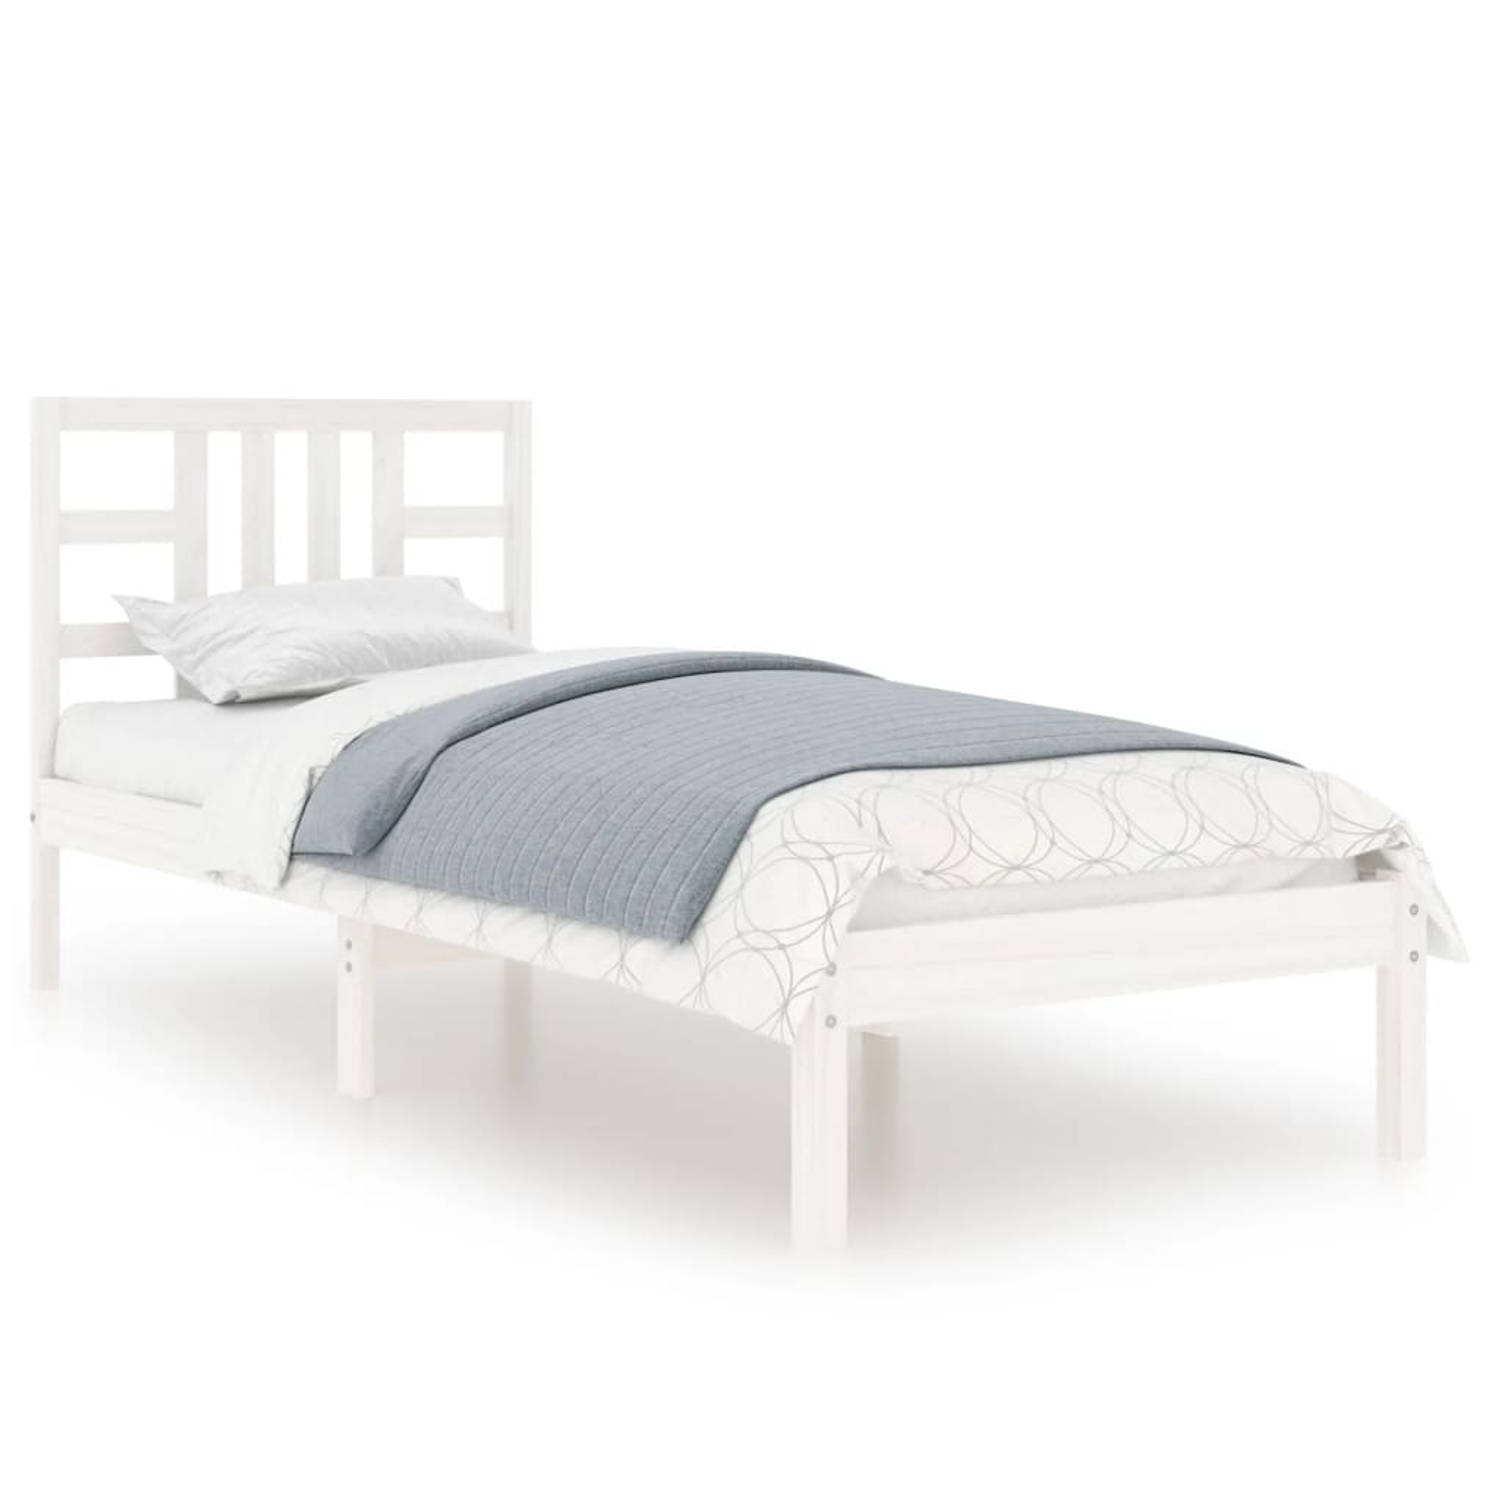 The Living Store Bed The Living Store Grenenhouten Bedframe - 205.5x105.5x31 cm - Wit